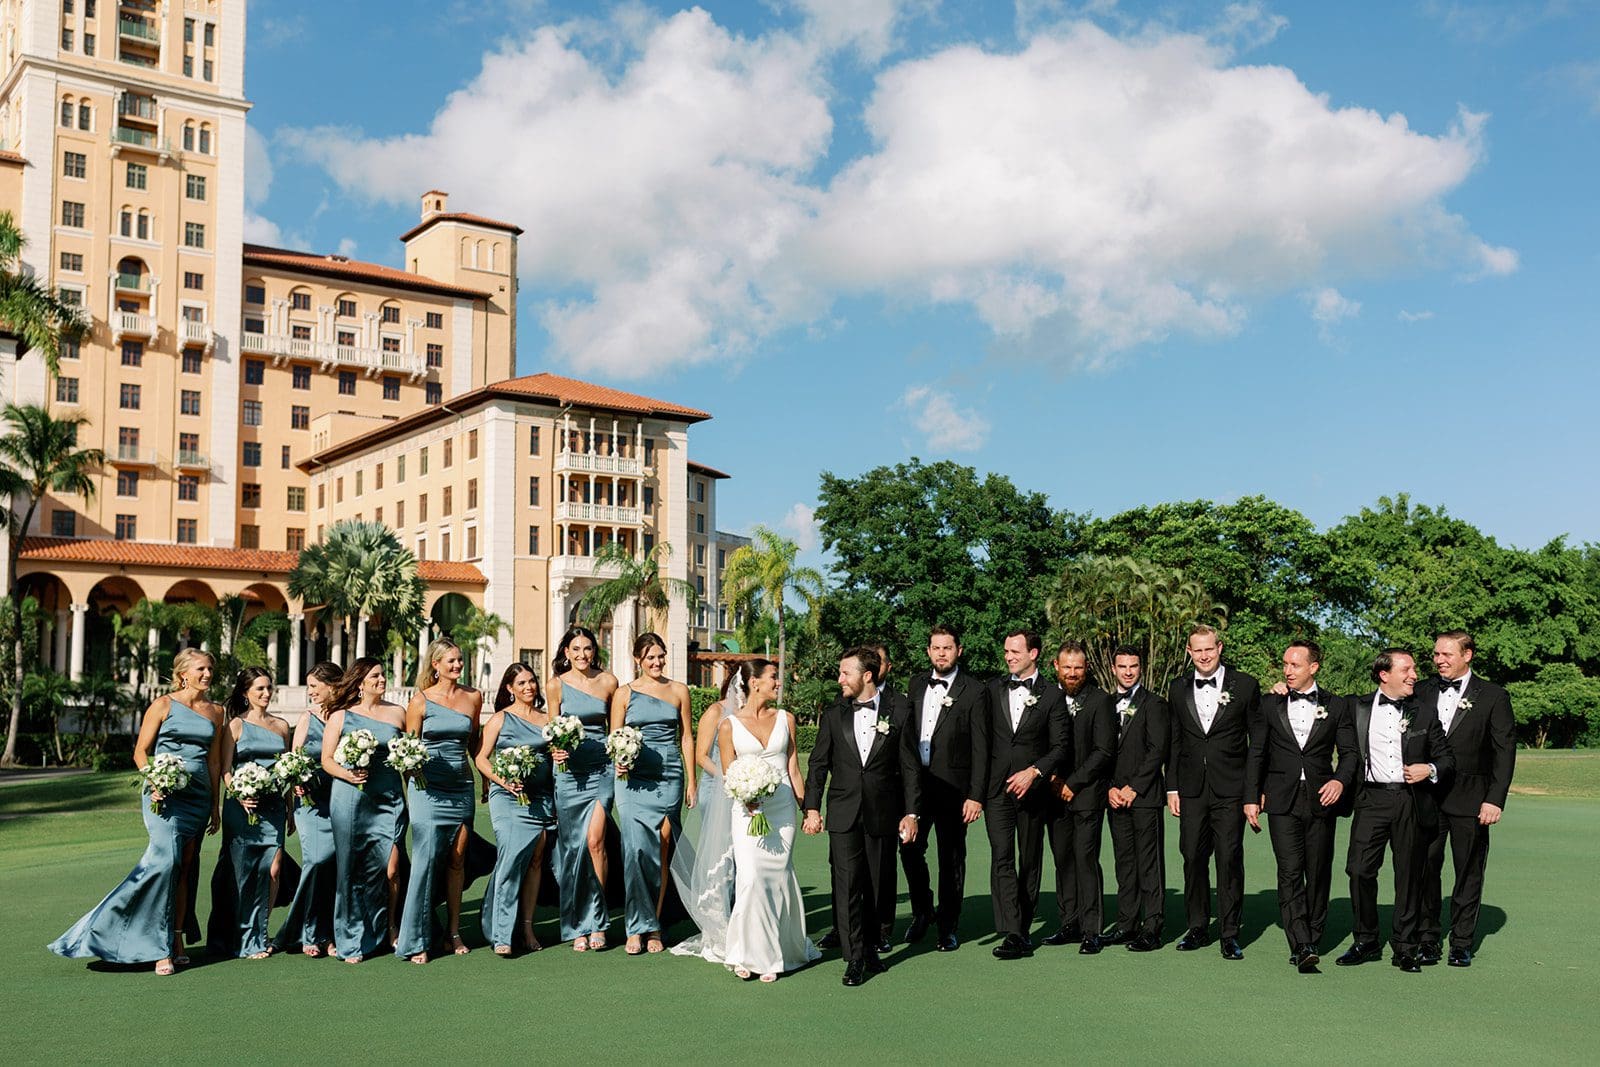 A wedding party, with bridesmaids in blue dresses and groomsmen in black tuxedos, stands on a green lawn before a large hotel building.